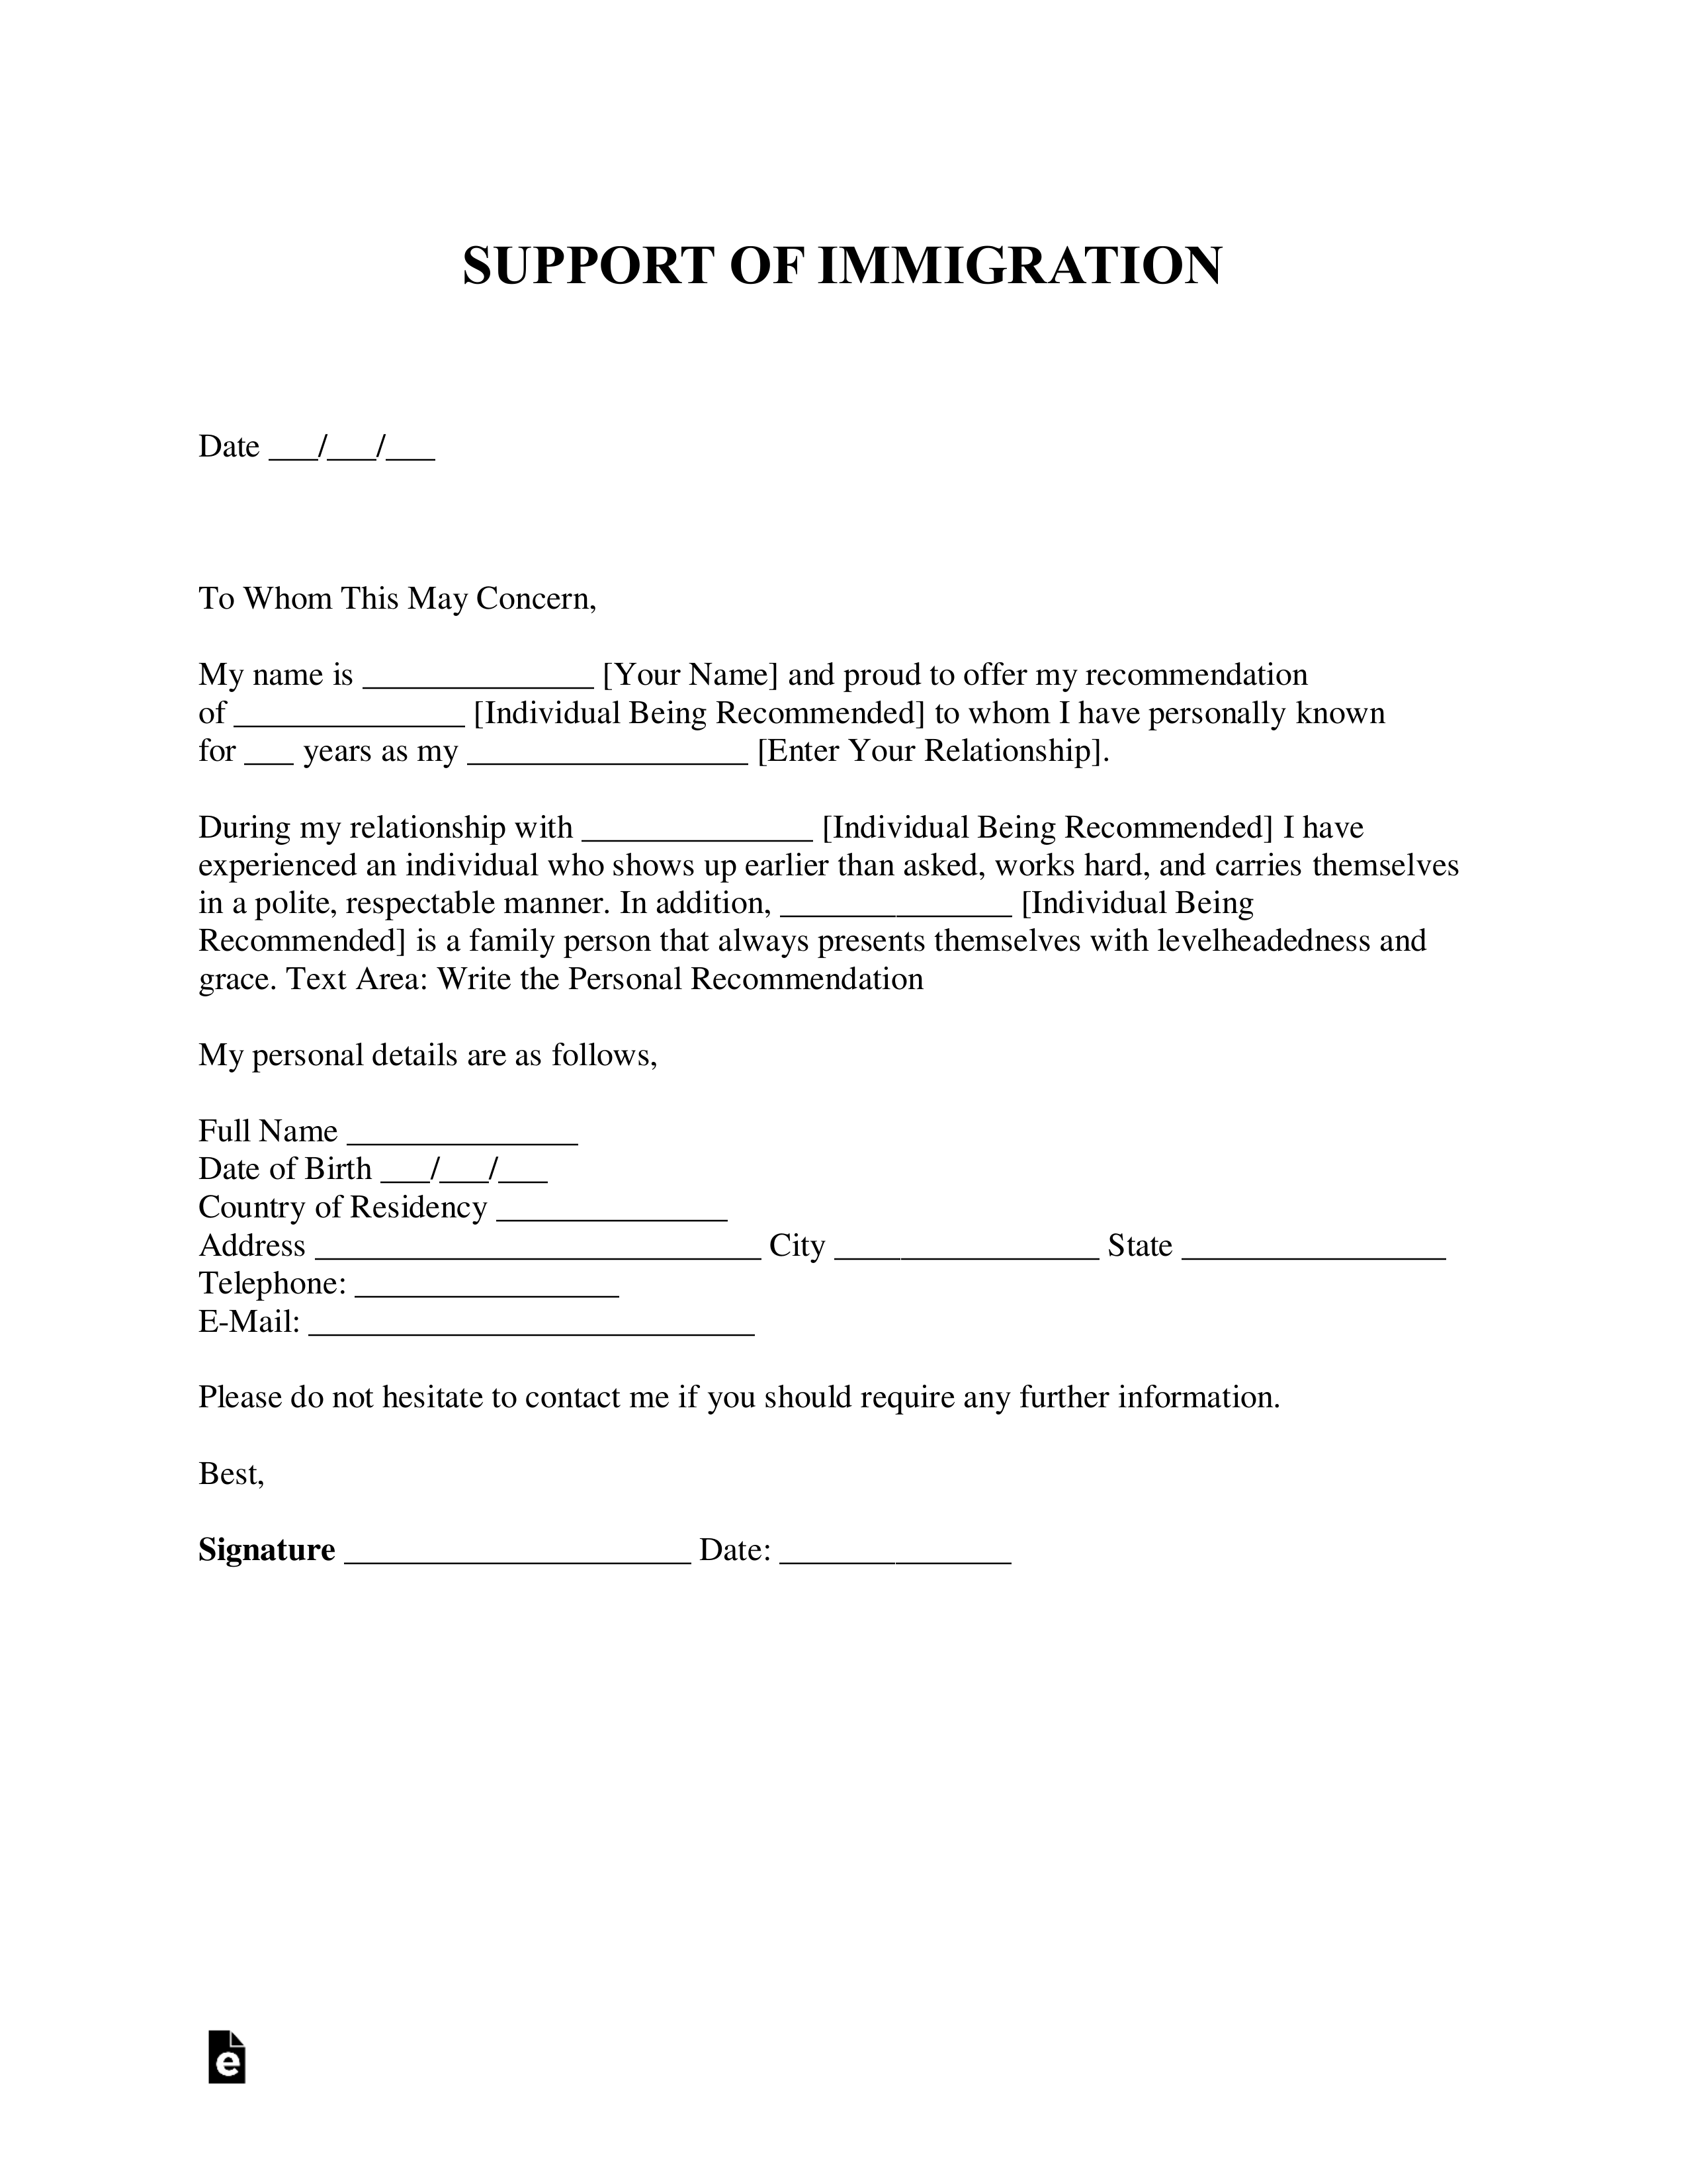 Sample Reference Letter From Employer For Immigration from eforms.com